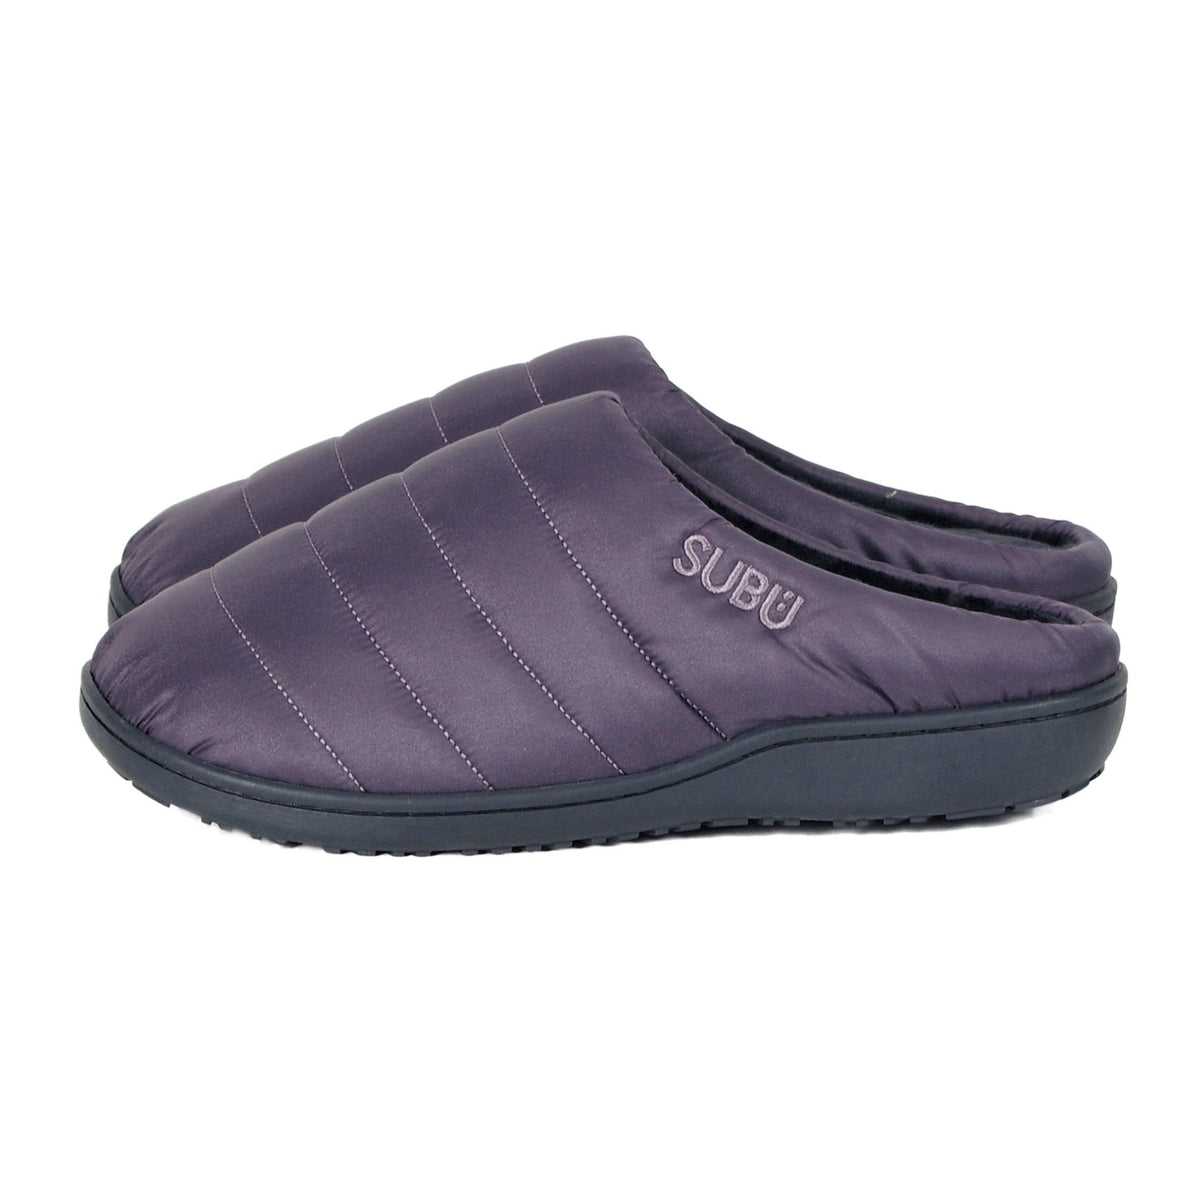 SUBU, Fall & Winter Slippers Steel Grey, Size, 0, Slippers,